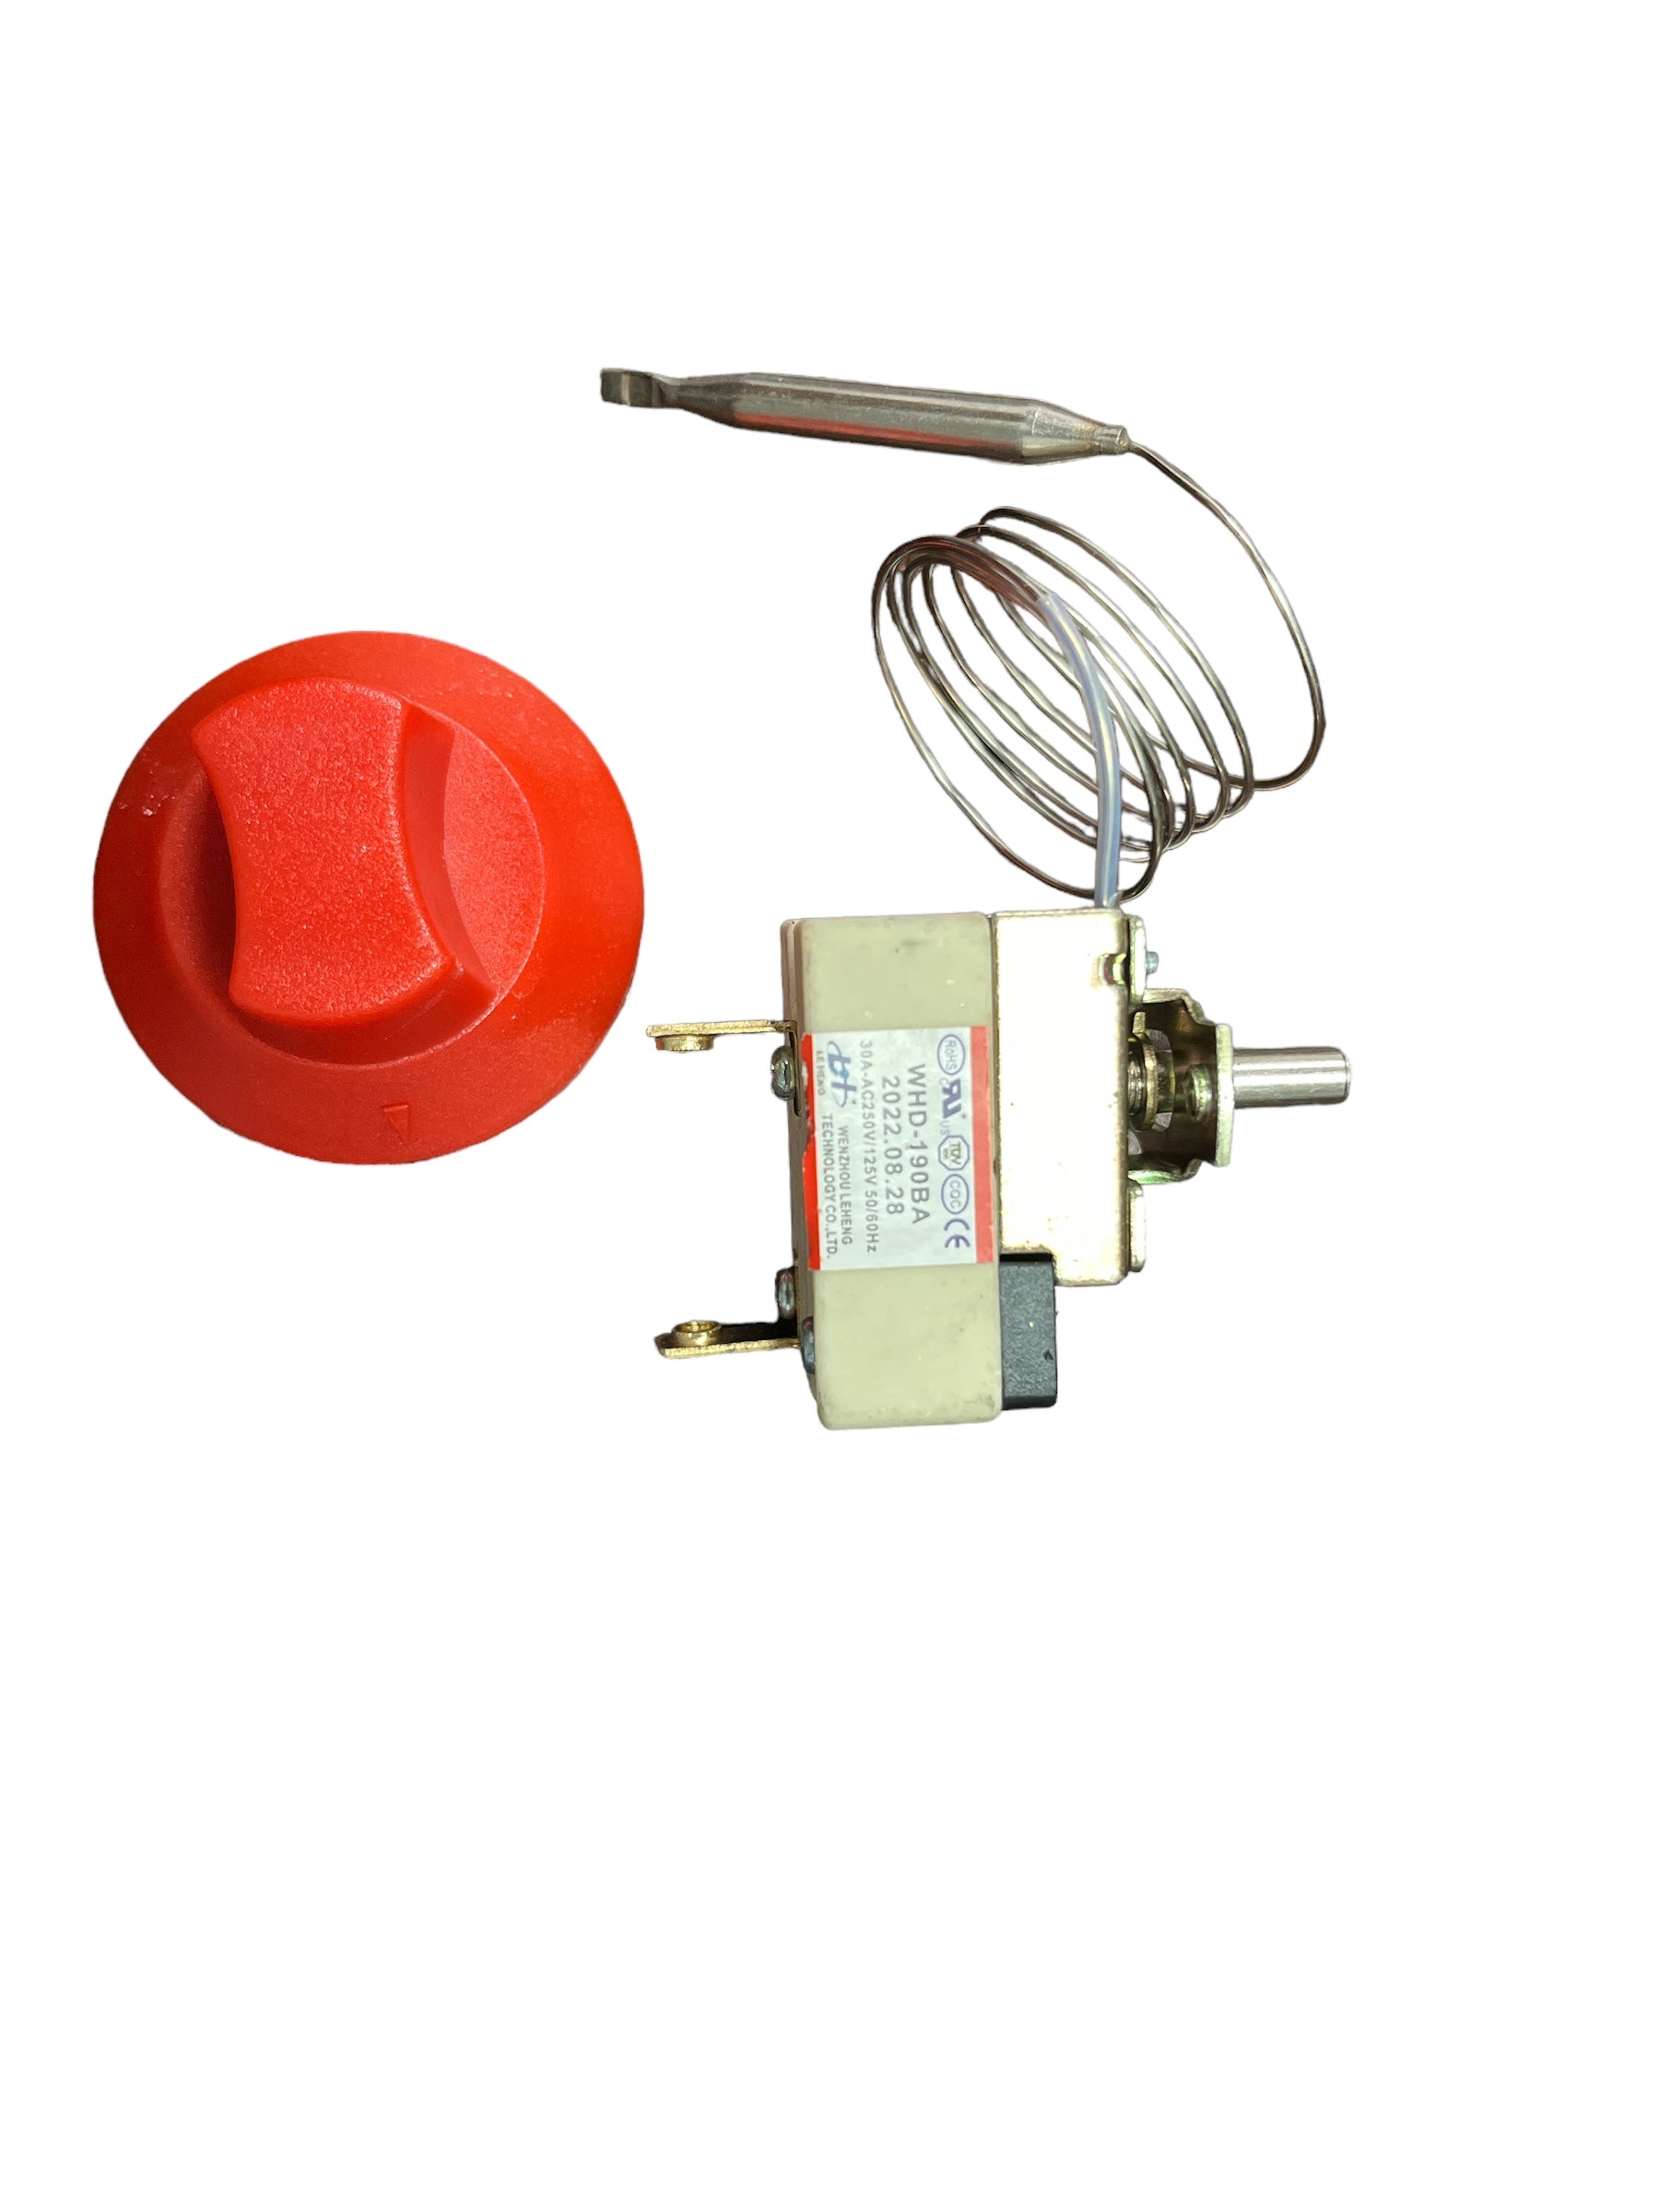 RCRO144 THERMOSTAT ASSEMBLY 50-200C 30A (W/DIAL PLATE, RED KNOB AND SCREWS) 51.490.22318-7